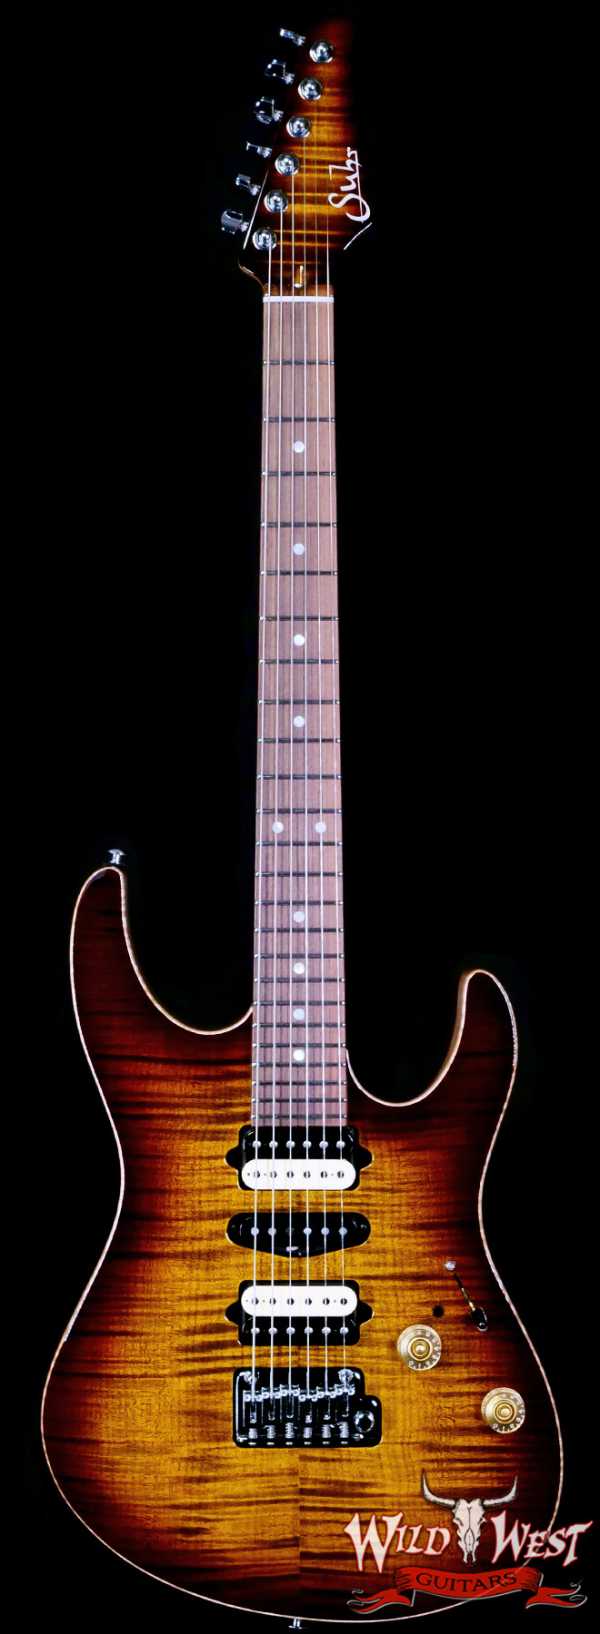 Suhr Custom Modern HSH with Blower Switch Flame Maple Top Bengal Burst 7.30 LBS